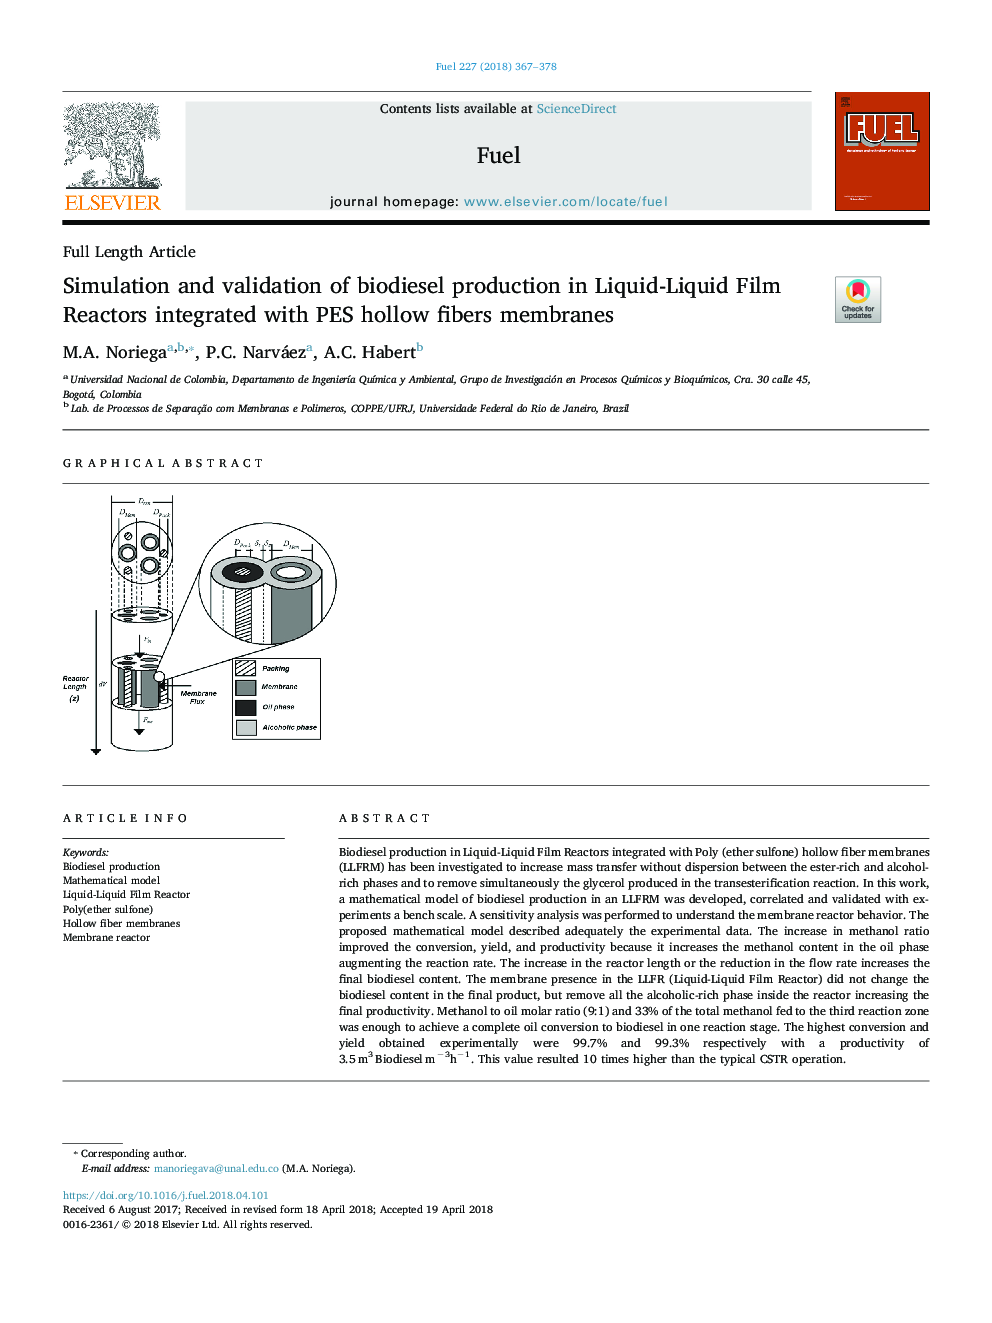 Simulation and validation of biodiesel production in Liquid-Liquid Film Reactors integrated with PES hollow fibers membranes